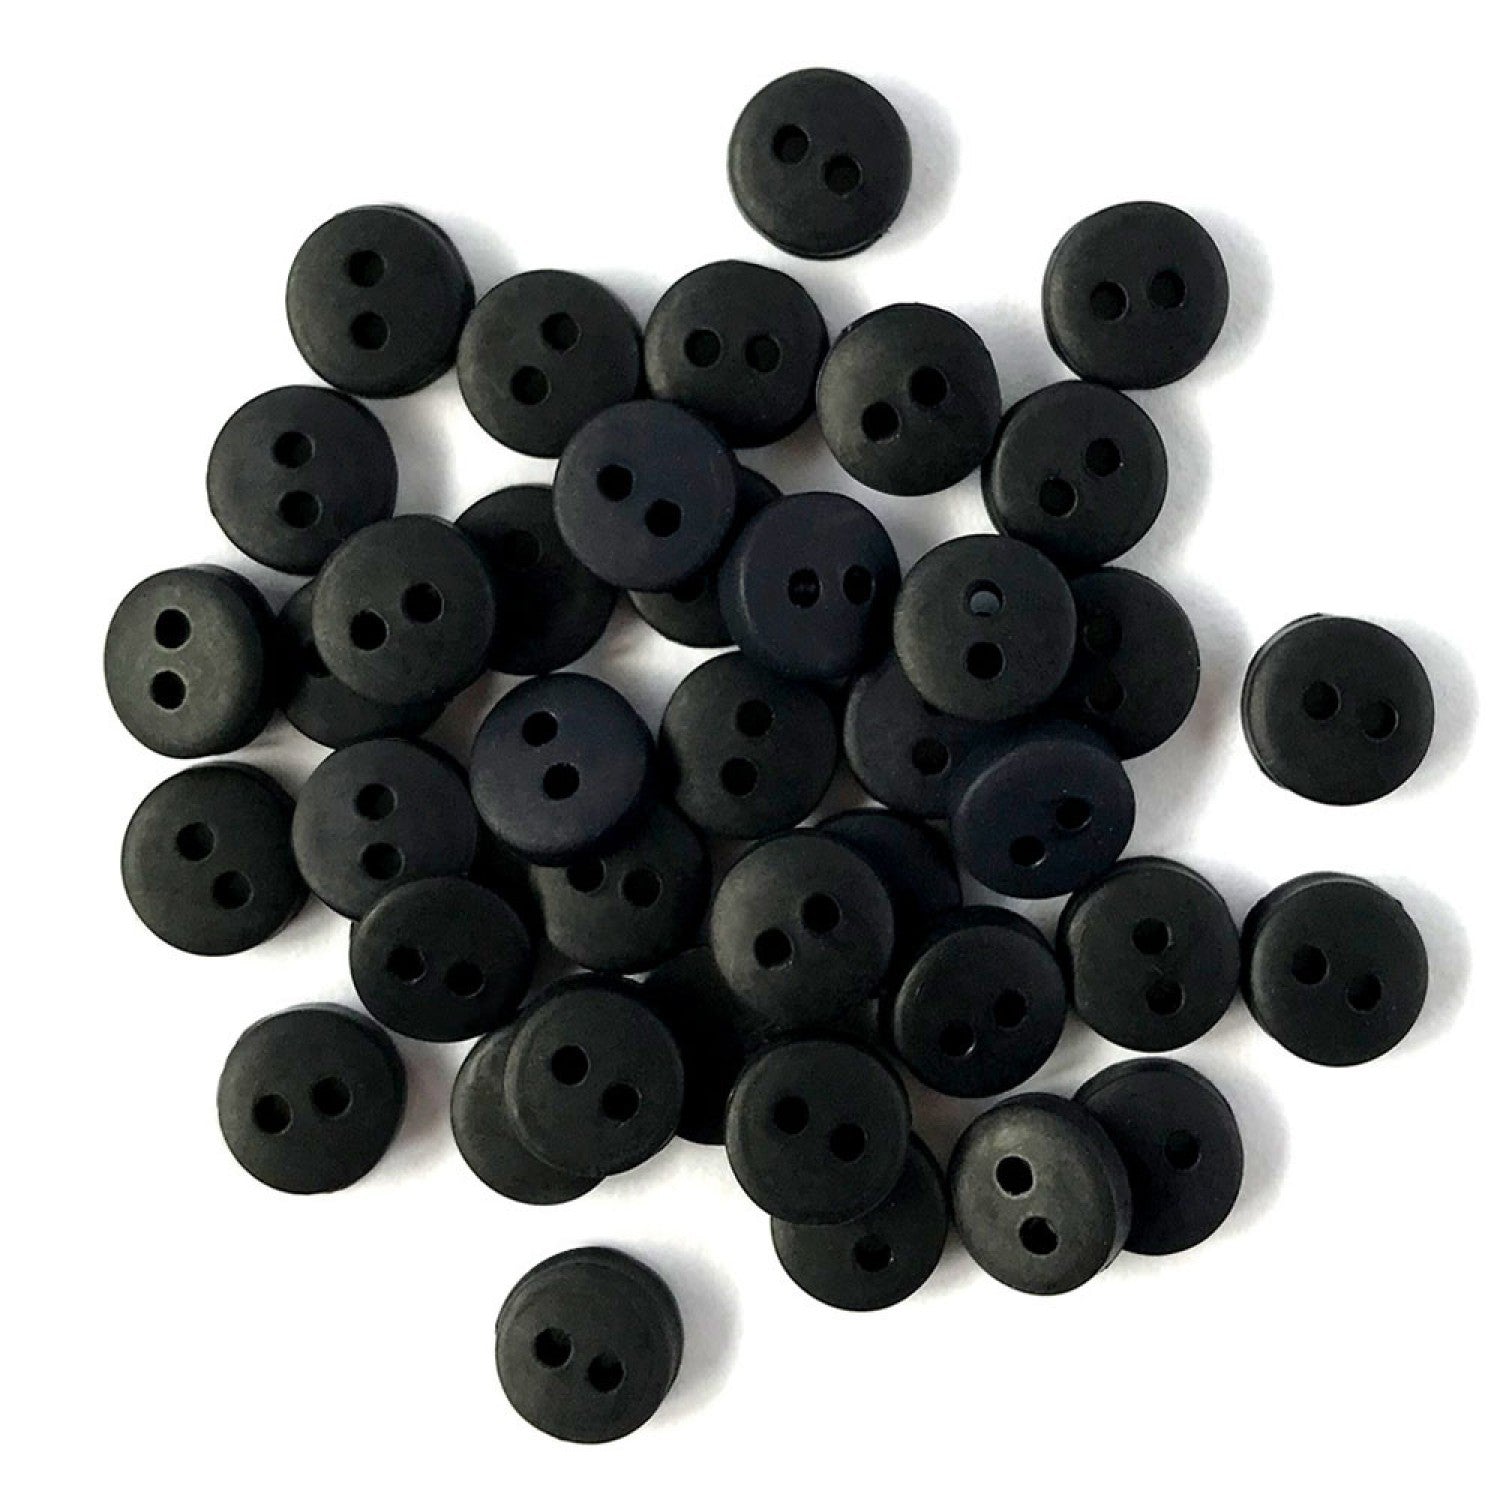 Buttons, Tiny Round Black Button 1/4 inch BG1553